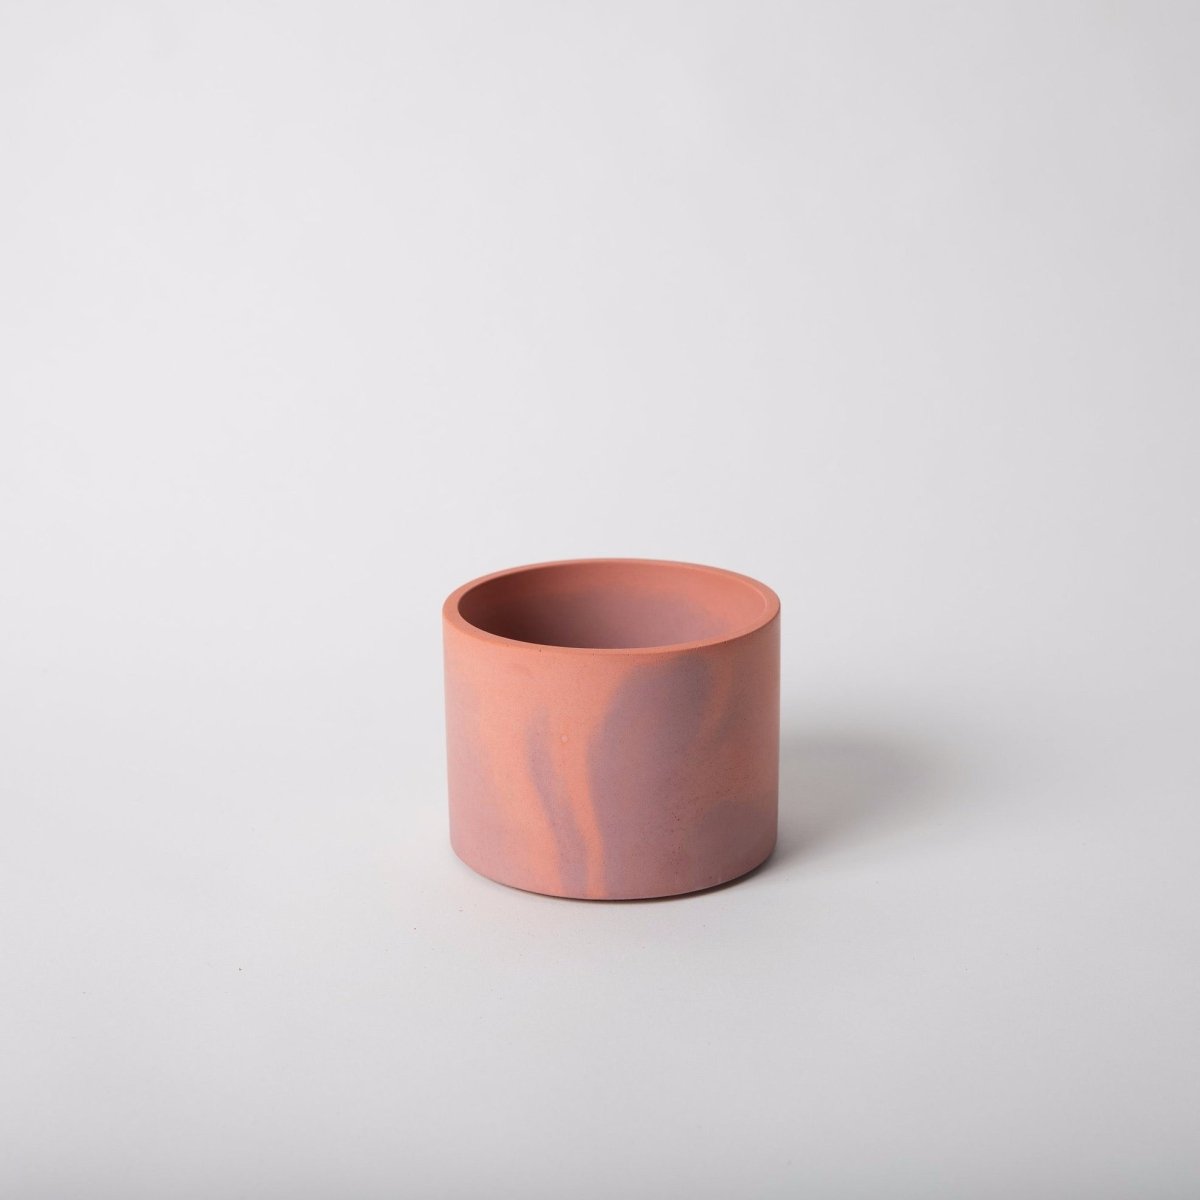 Four inch vessel in the shade pink + mauve. Made by Pretti.Cool in Houston, Texas.